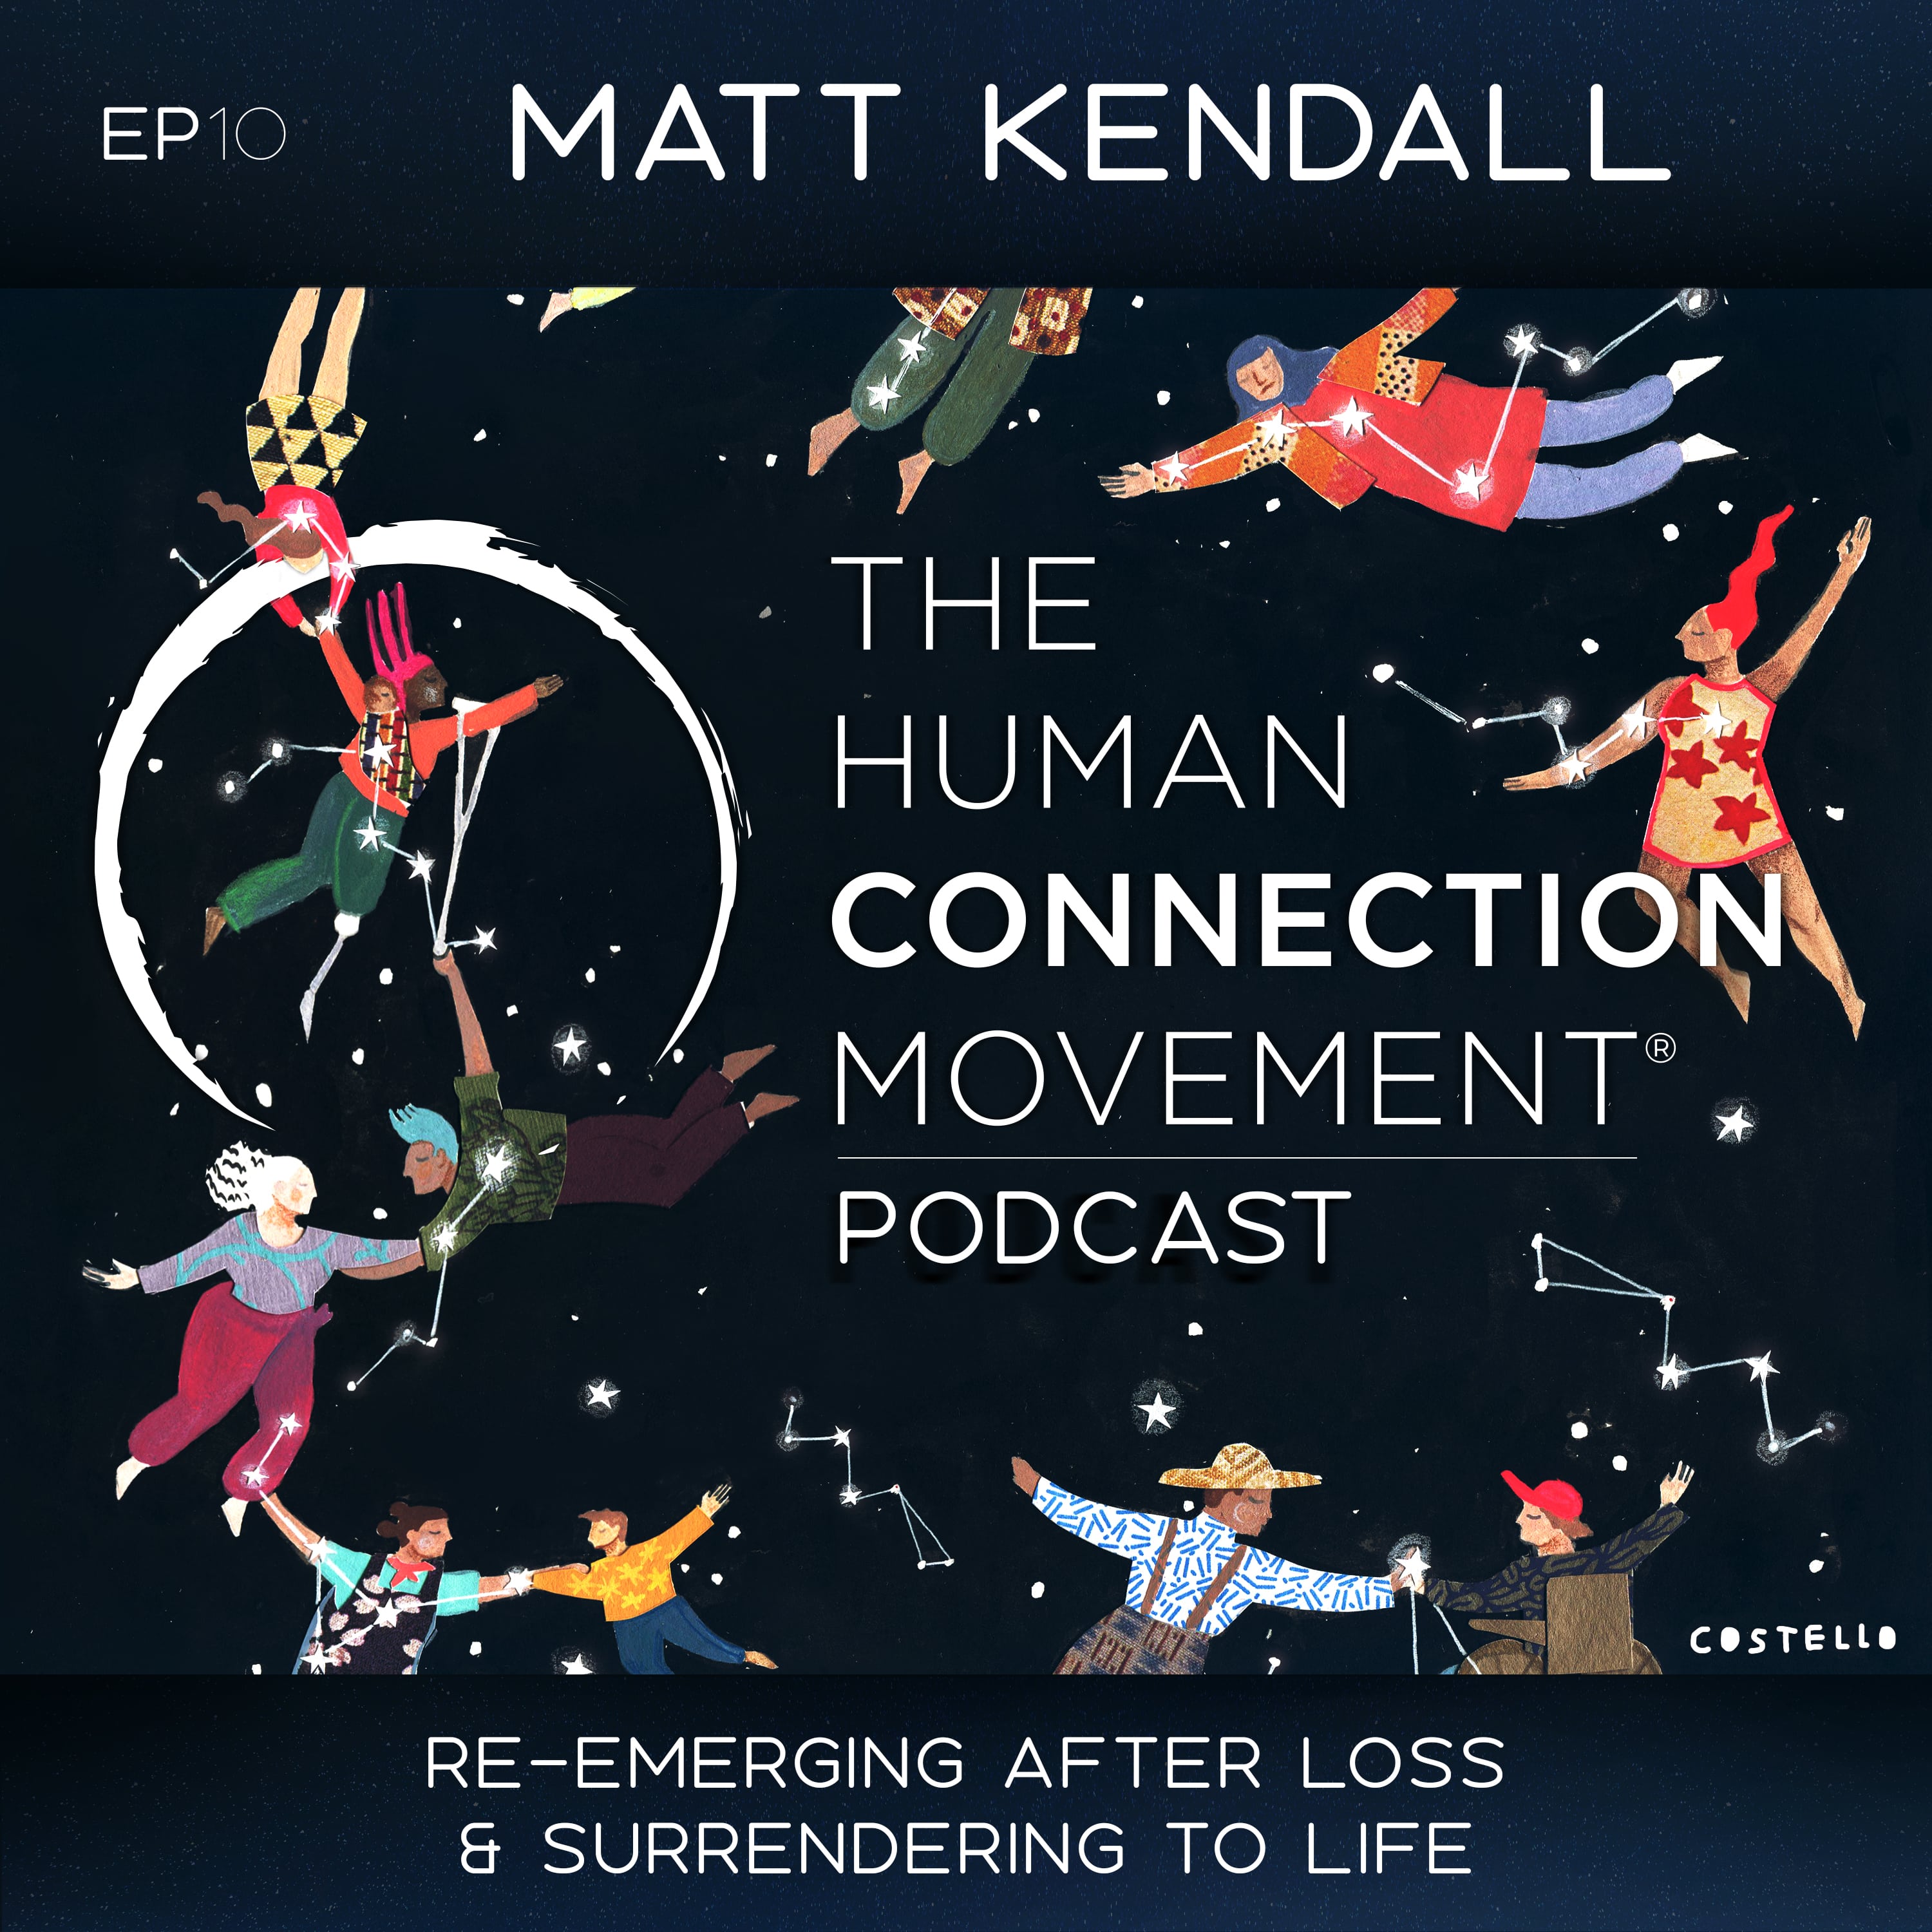 Artwork for podcast The Human Connection Movement Podcast